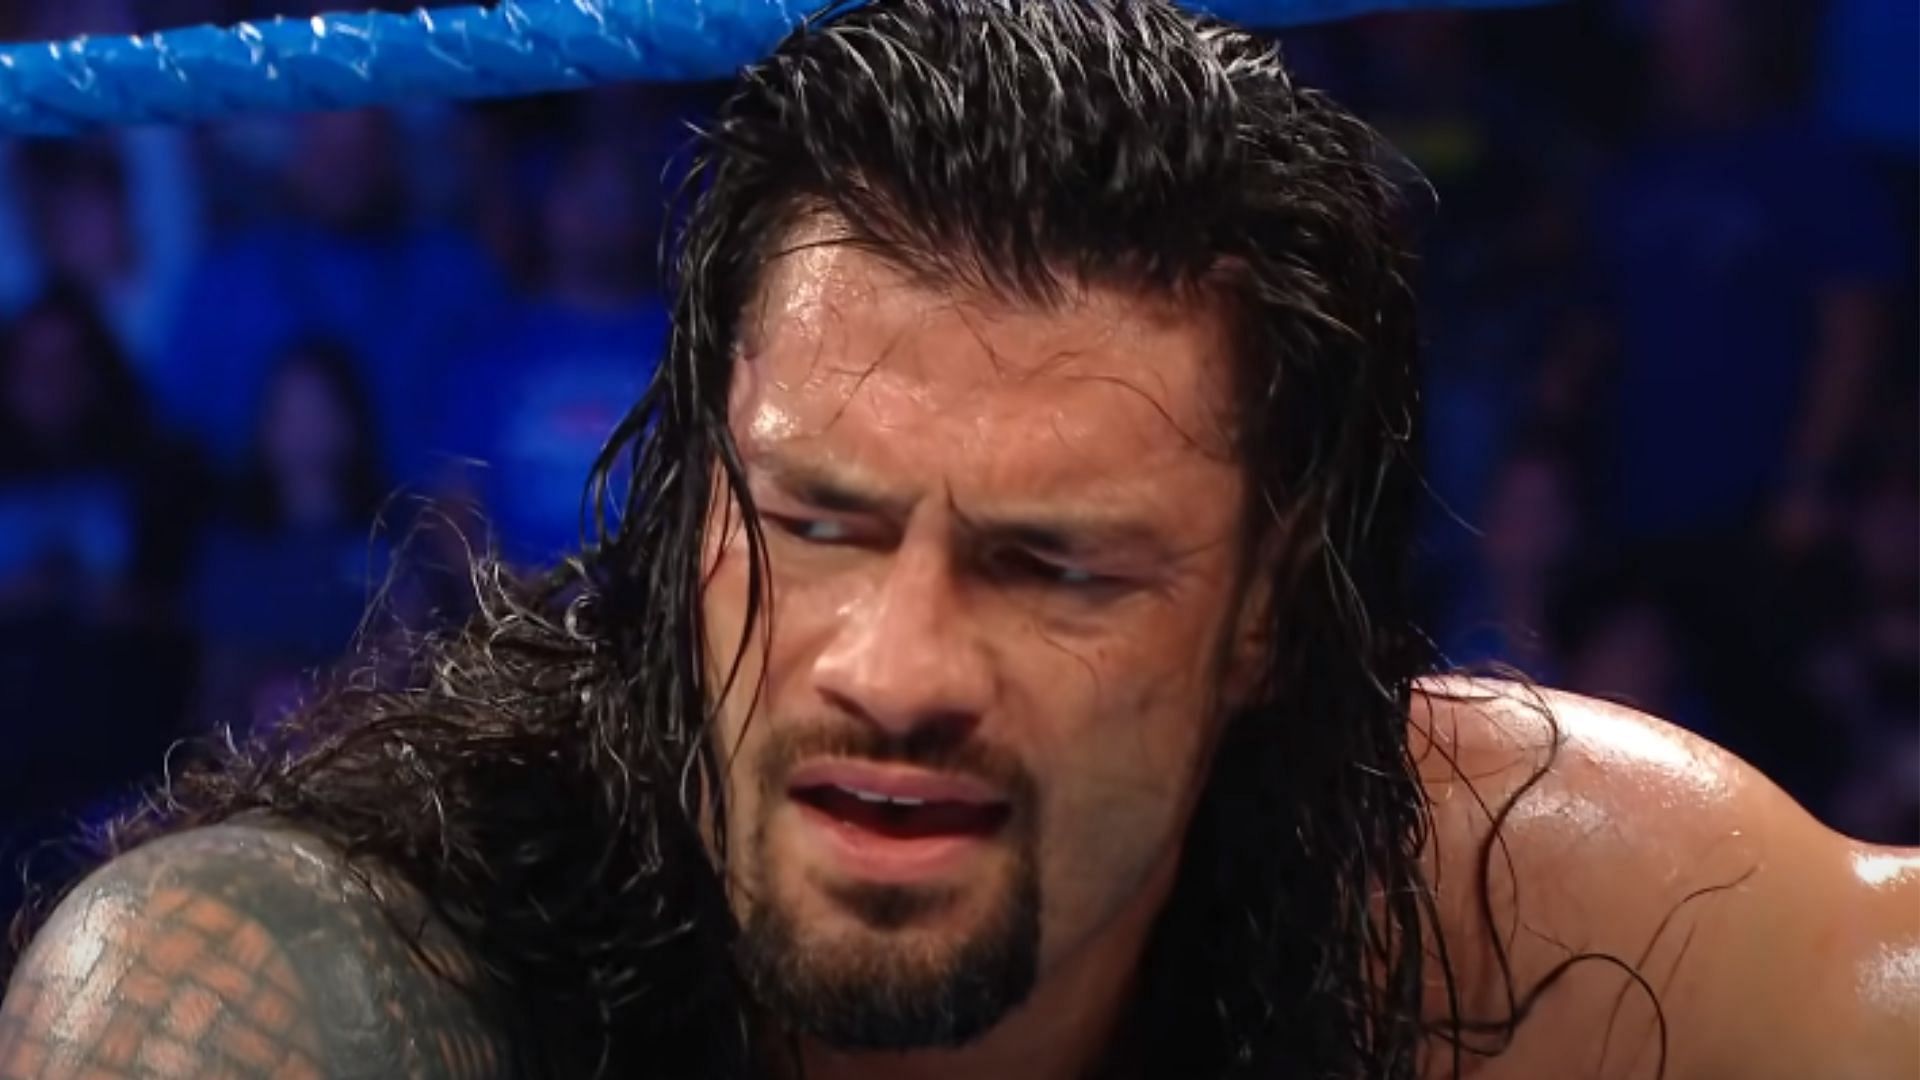 Roman Reigns is viewed by many as a WWE locker-room leader